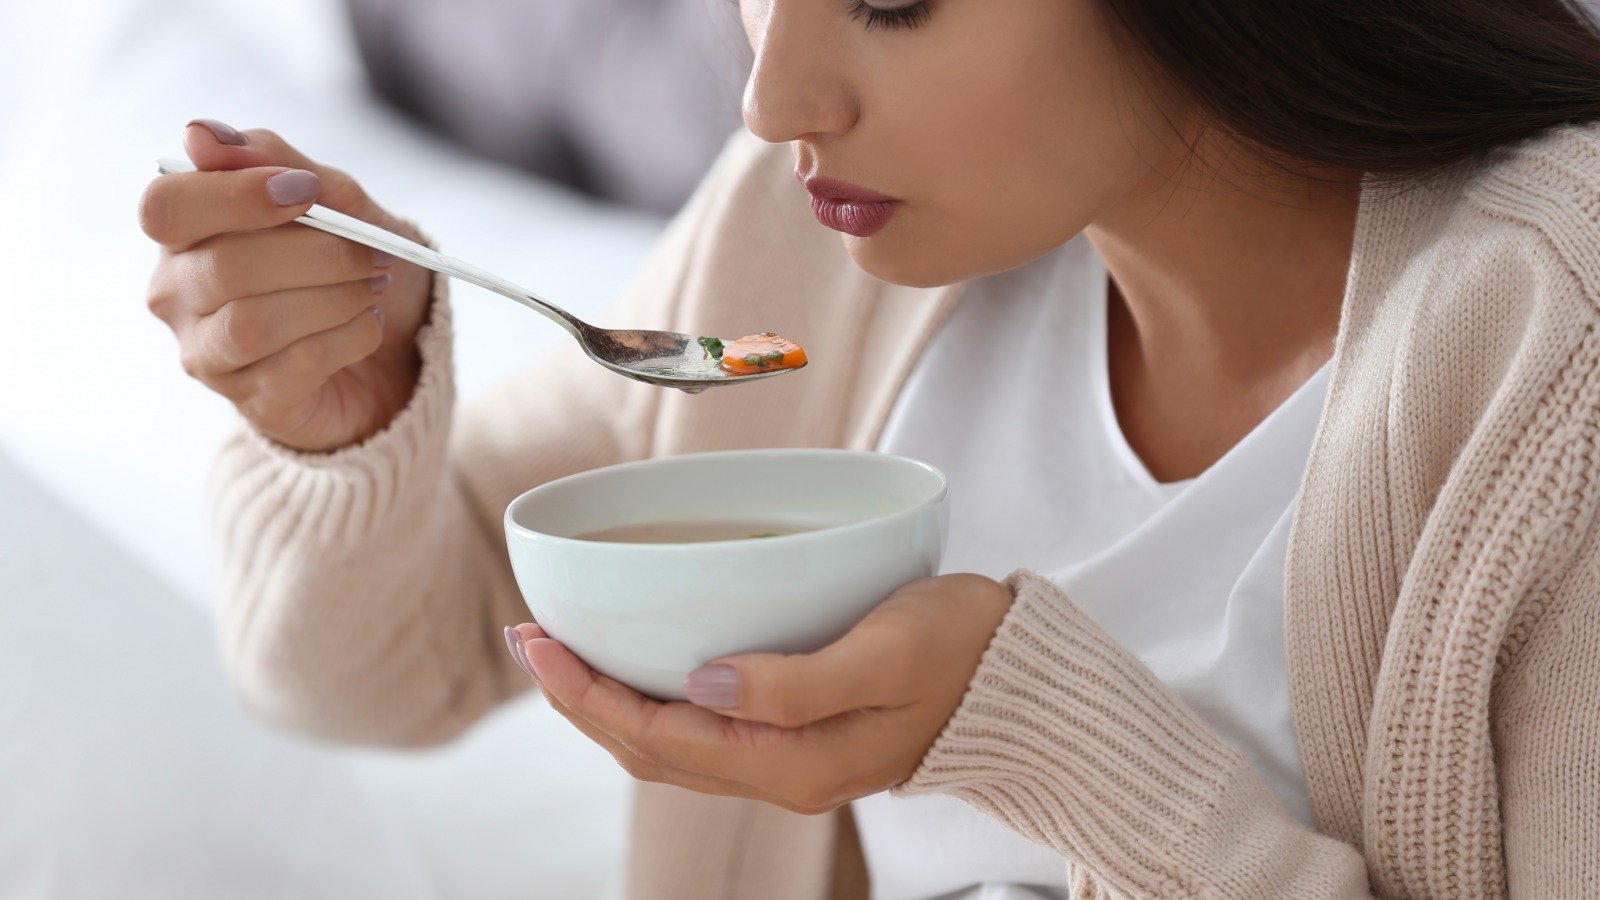 Don't Even Try To Eat These Foods When You're Sick